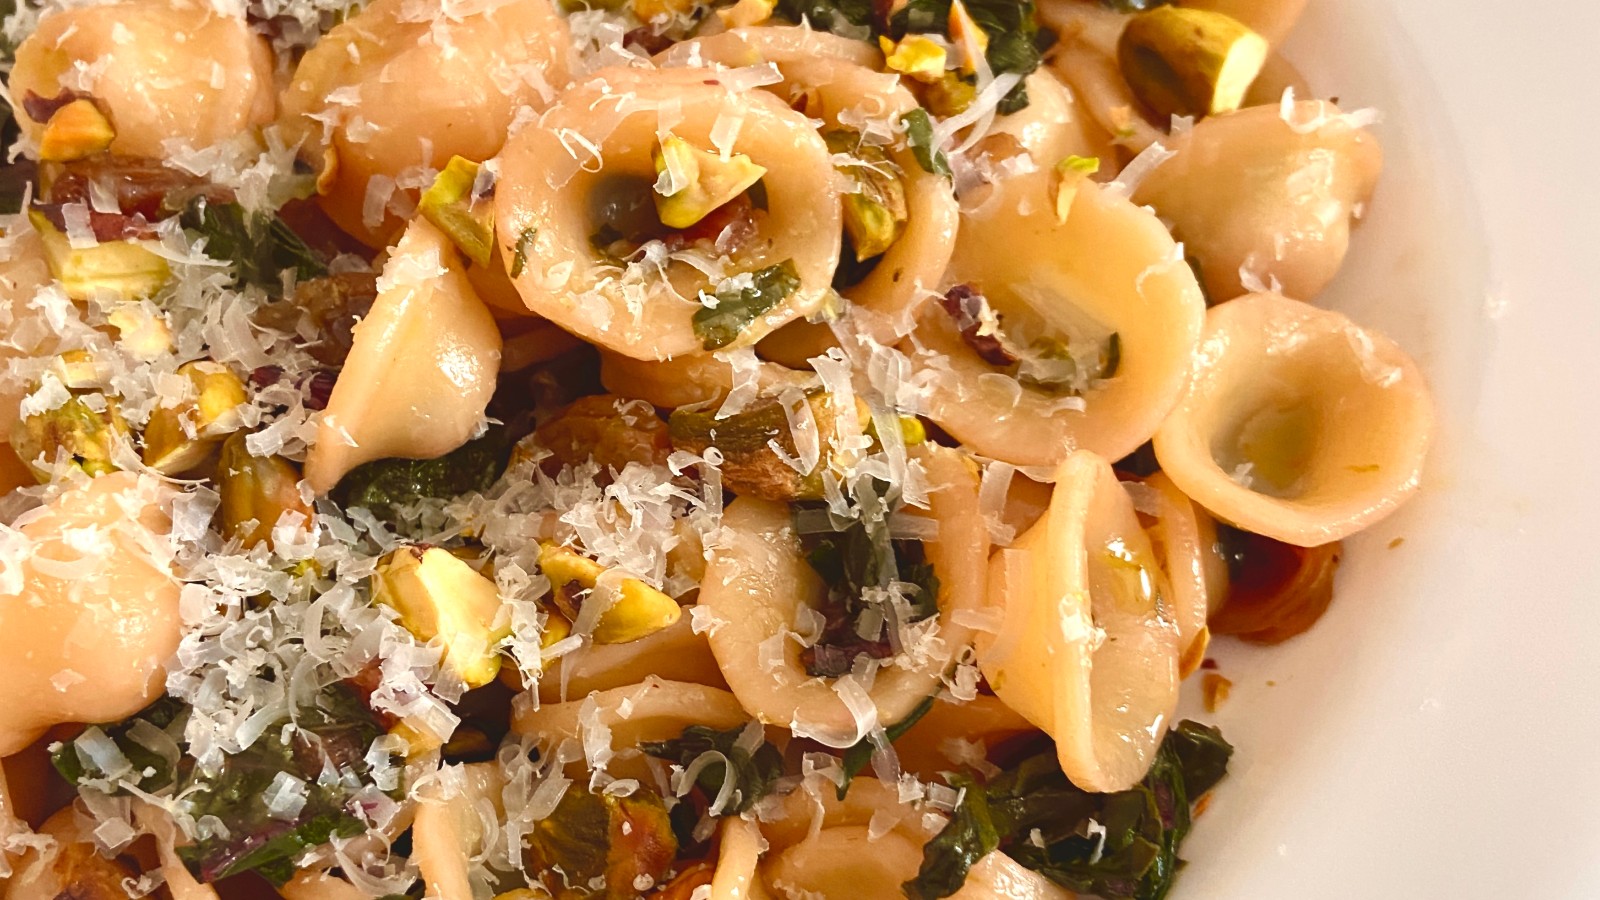 Image of Orecchiette with Swiss Chard, Raisins, and Pistachios